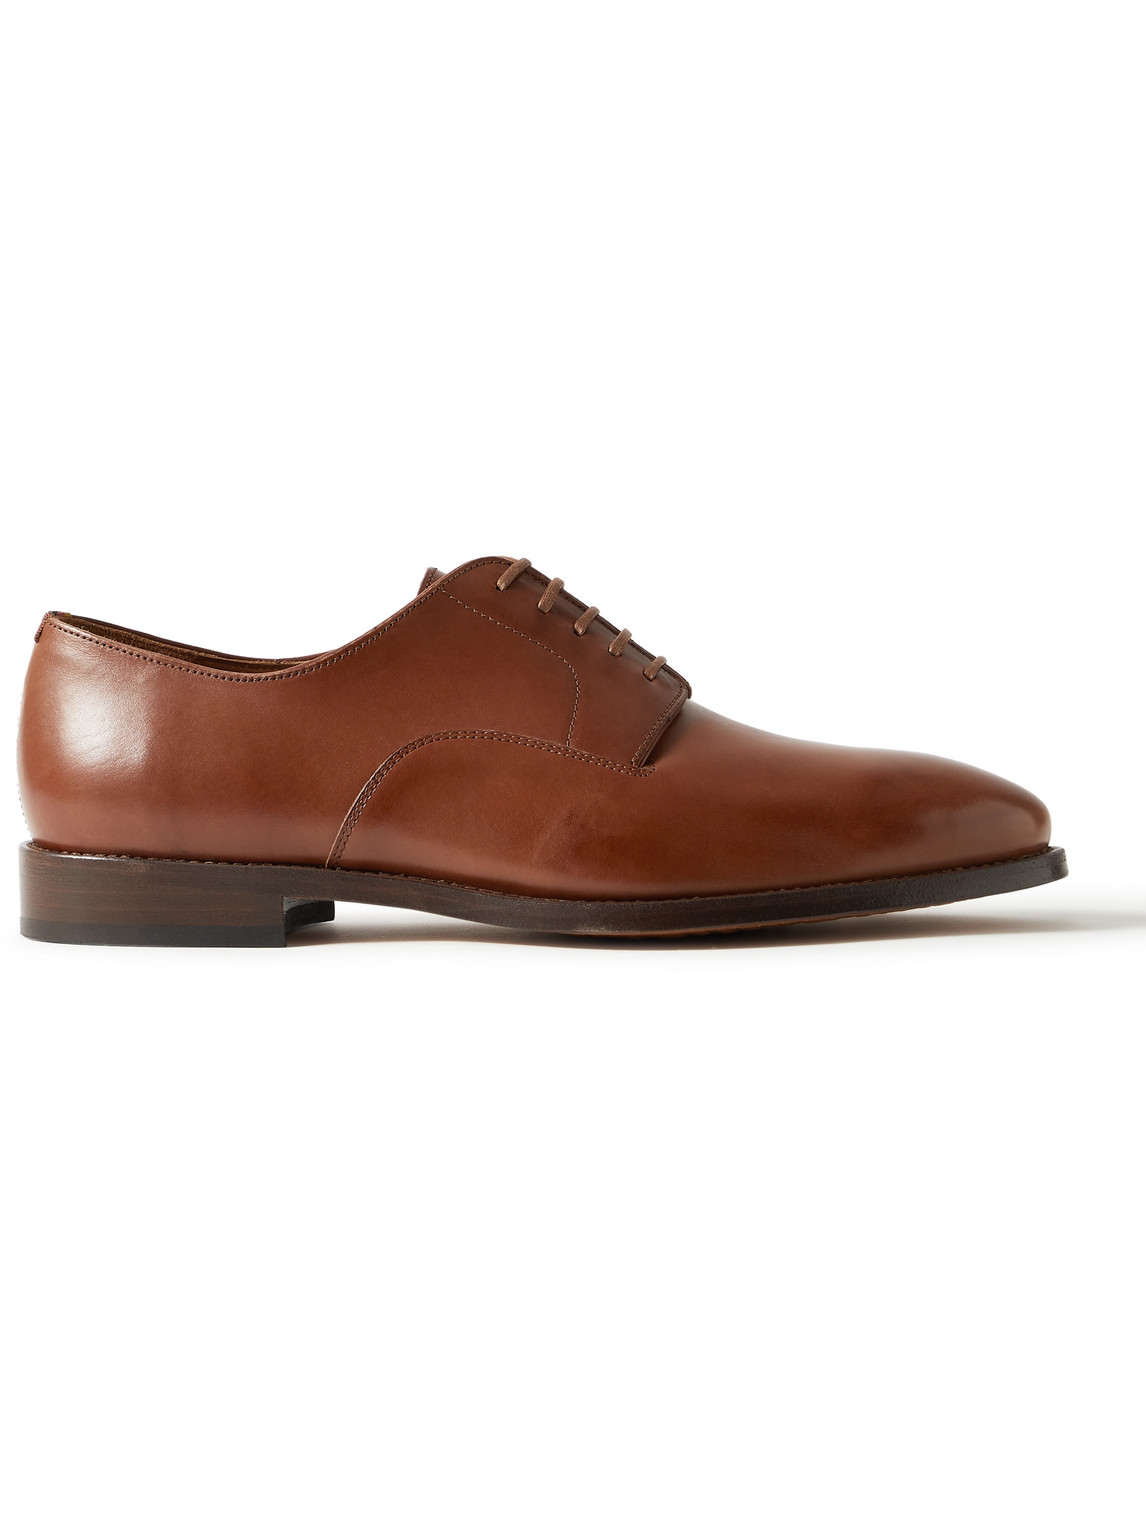 PAUL SMITH FES LEATHER DERBY SHOES